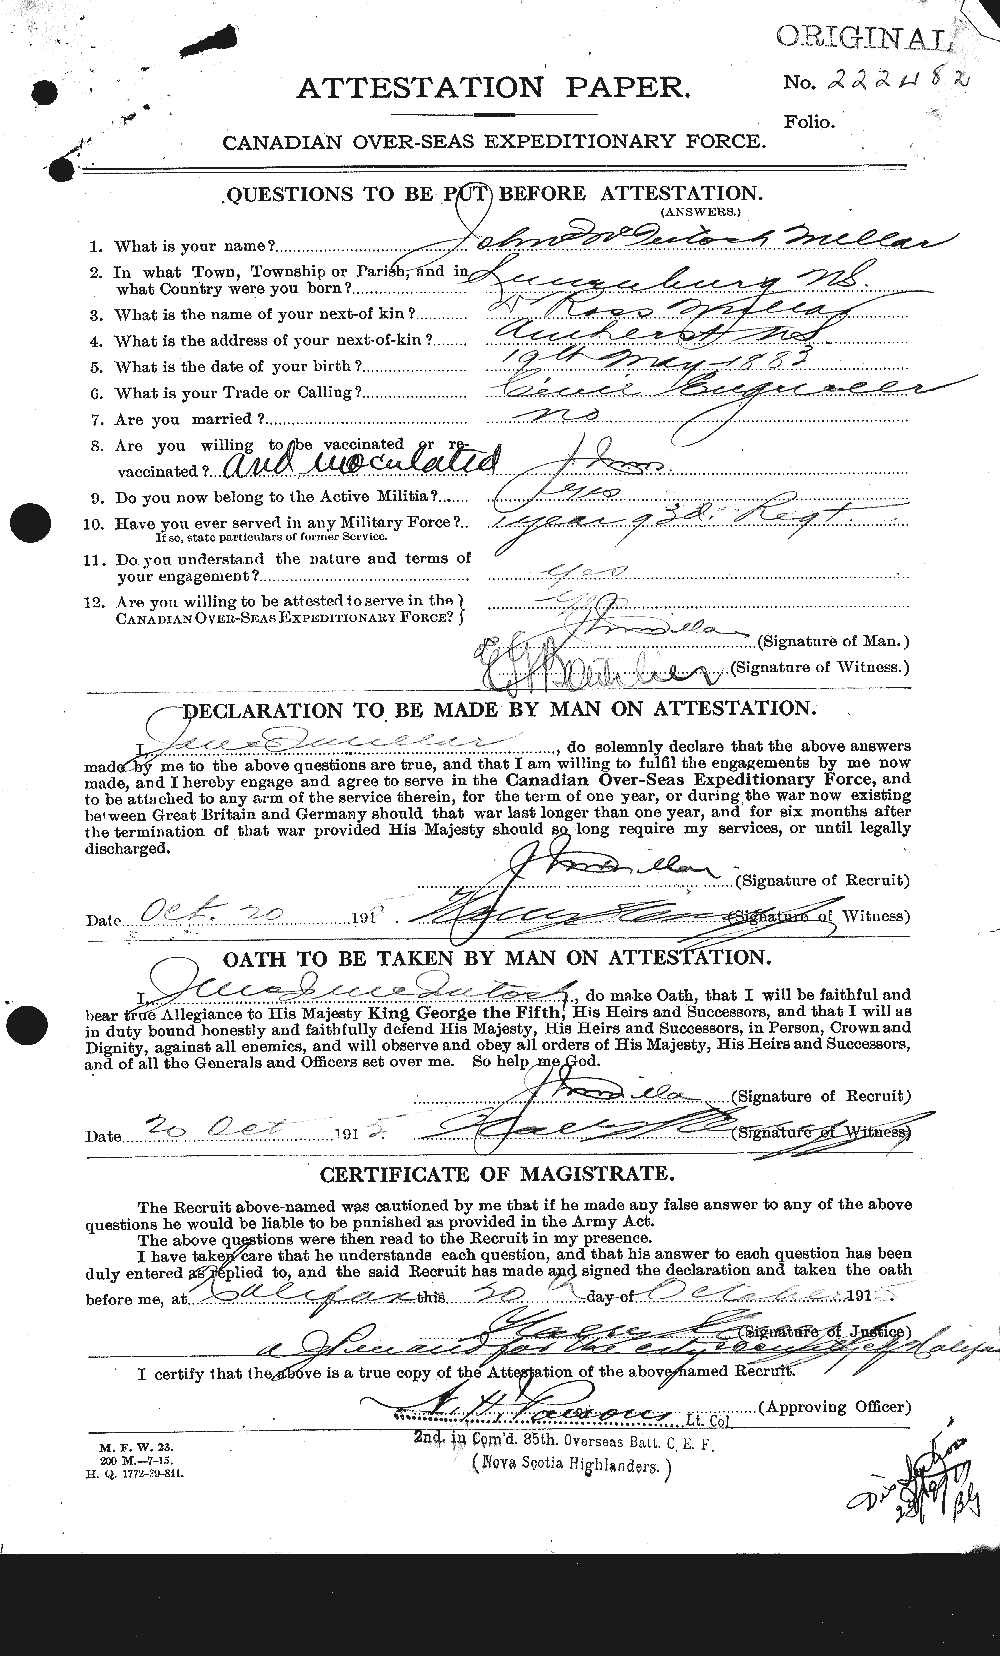 Personnel Records of the First World War - CEF 495328a